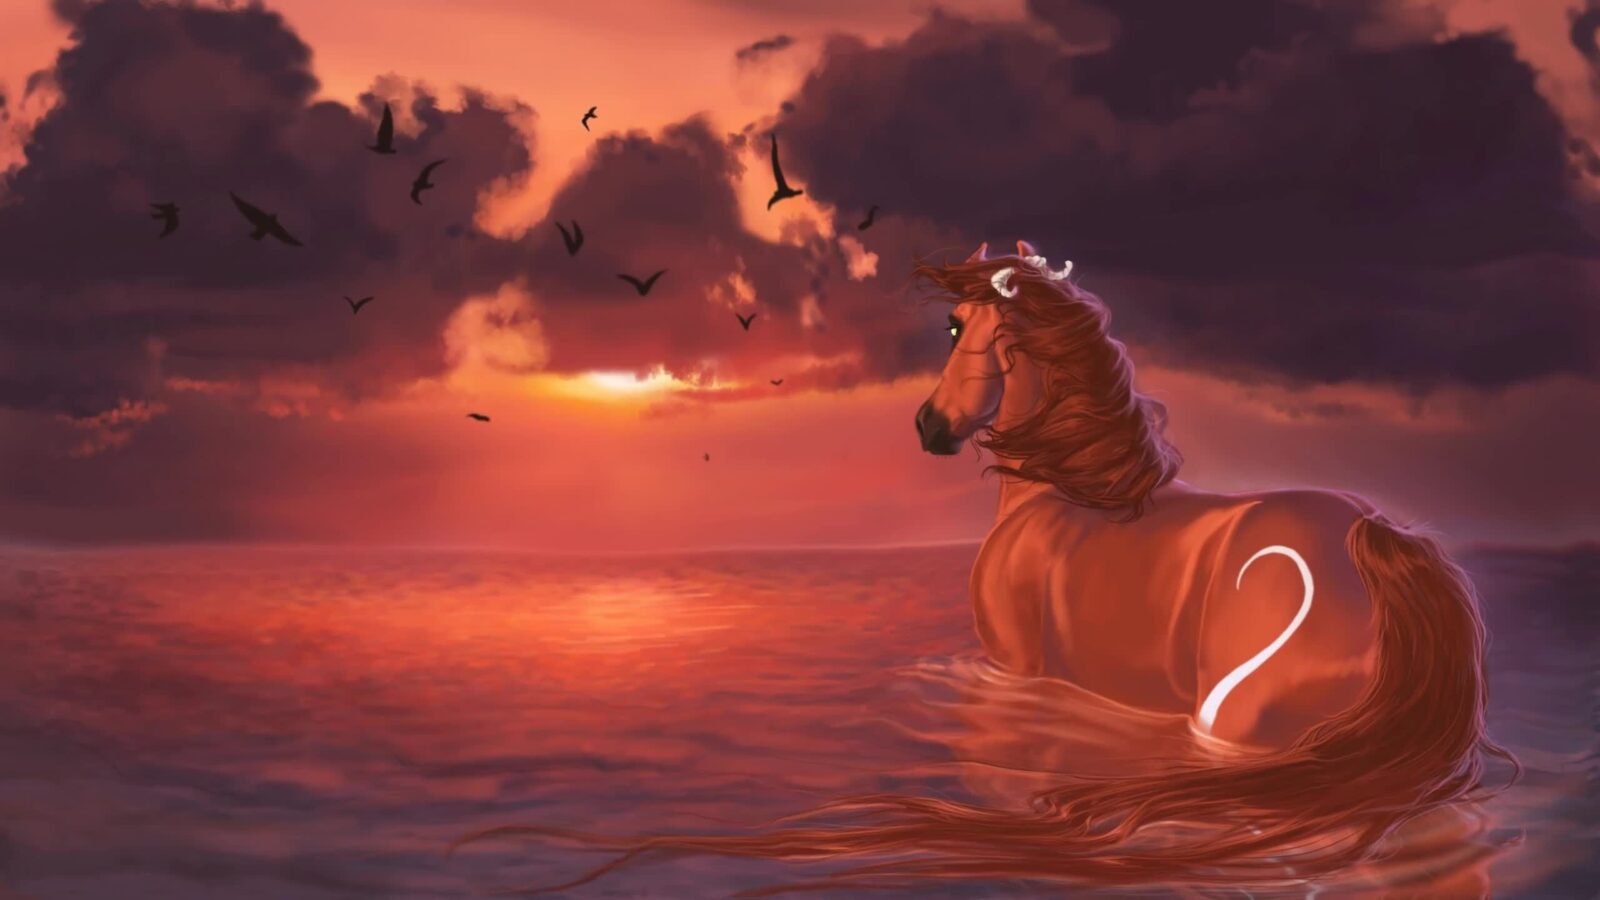 LiveWallpapers4Free.com | Animated Horse Water 2K - Free Live Wallpaper